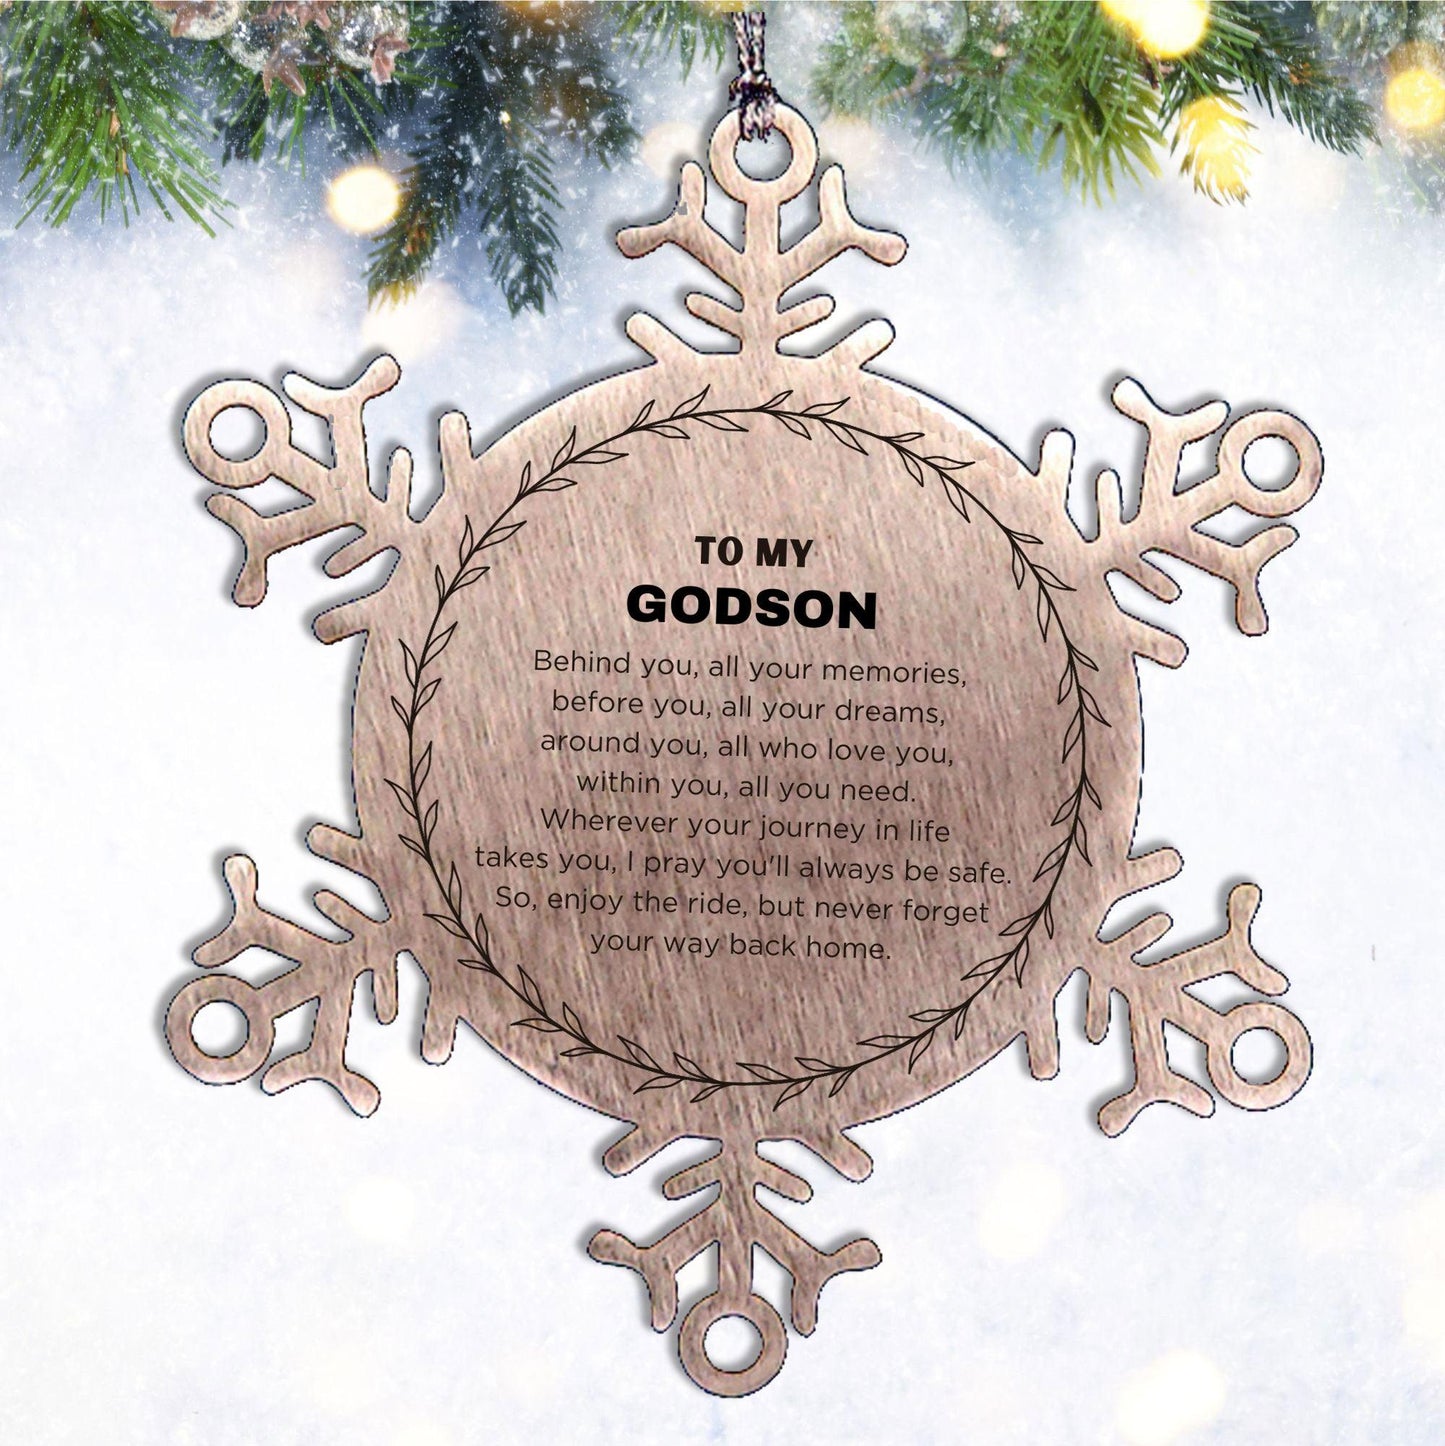 Inspirational Godson Snowflake Ornament - Behind you, all your Memories, Before you, all your Dreams - Birthday, Christmas Holiday Gifts - Mallard Moon Gift Shop